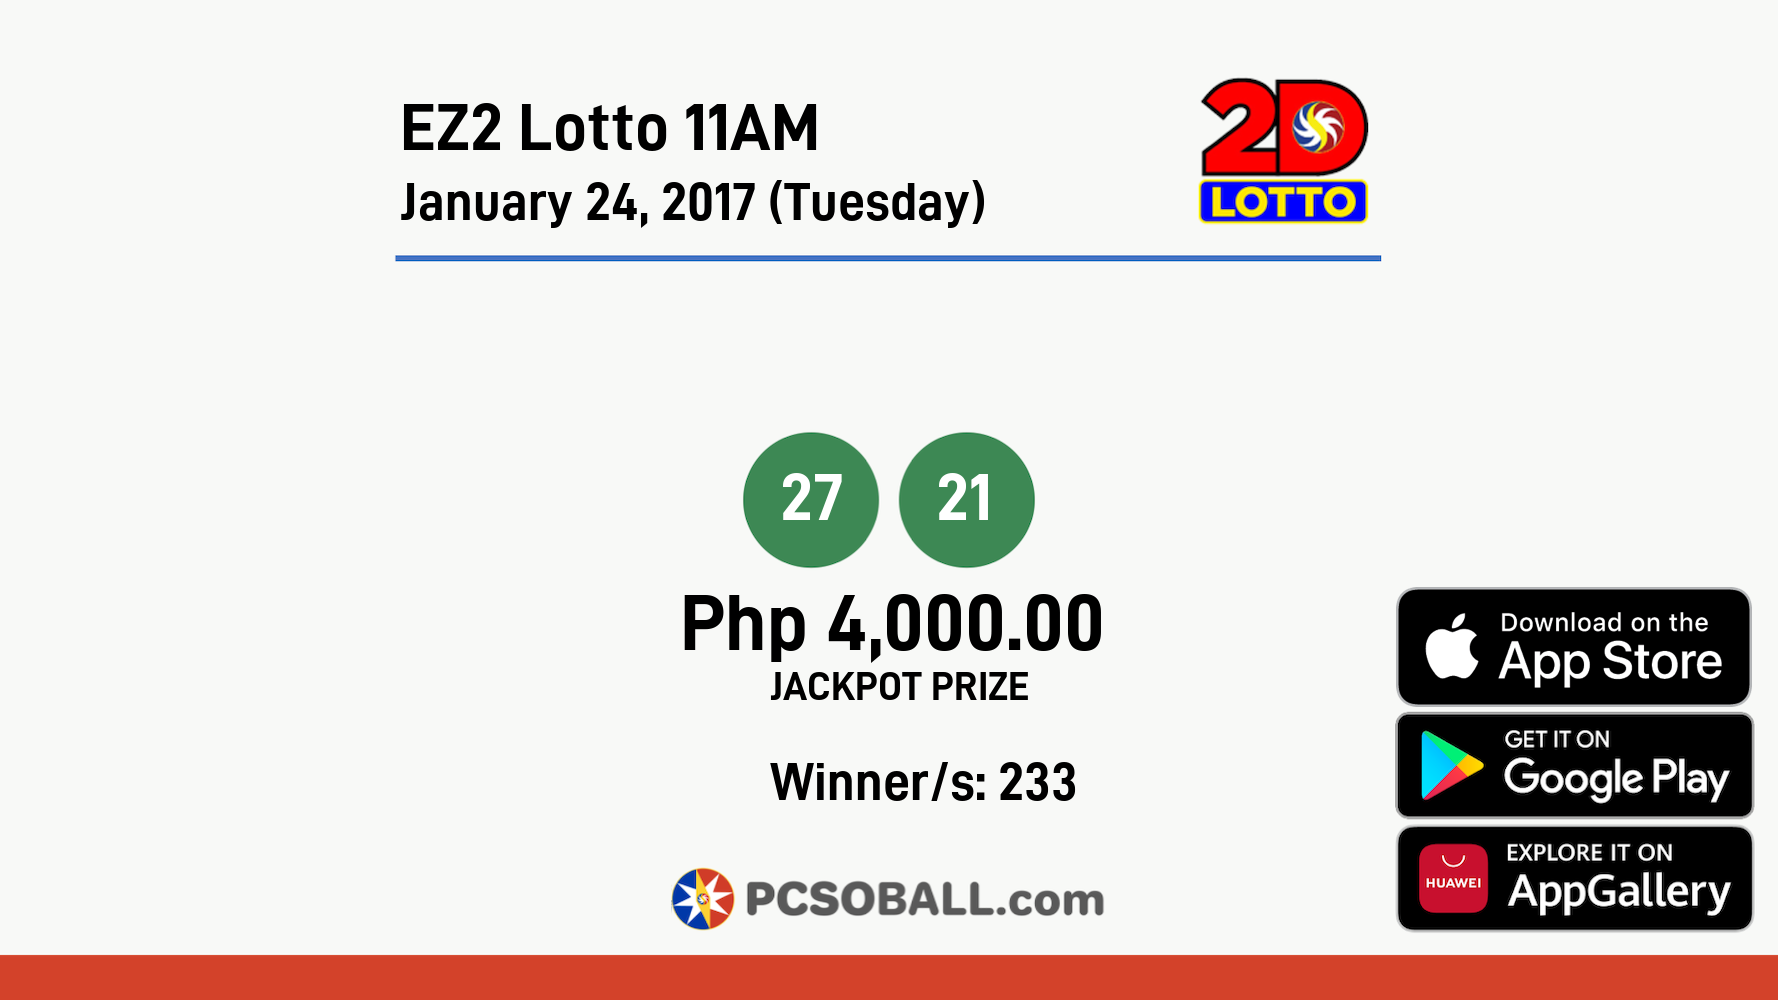 EZ2 Lotto 11AM January 24, 2017 (Tuesday) Result